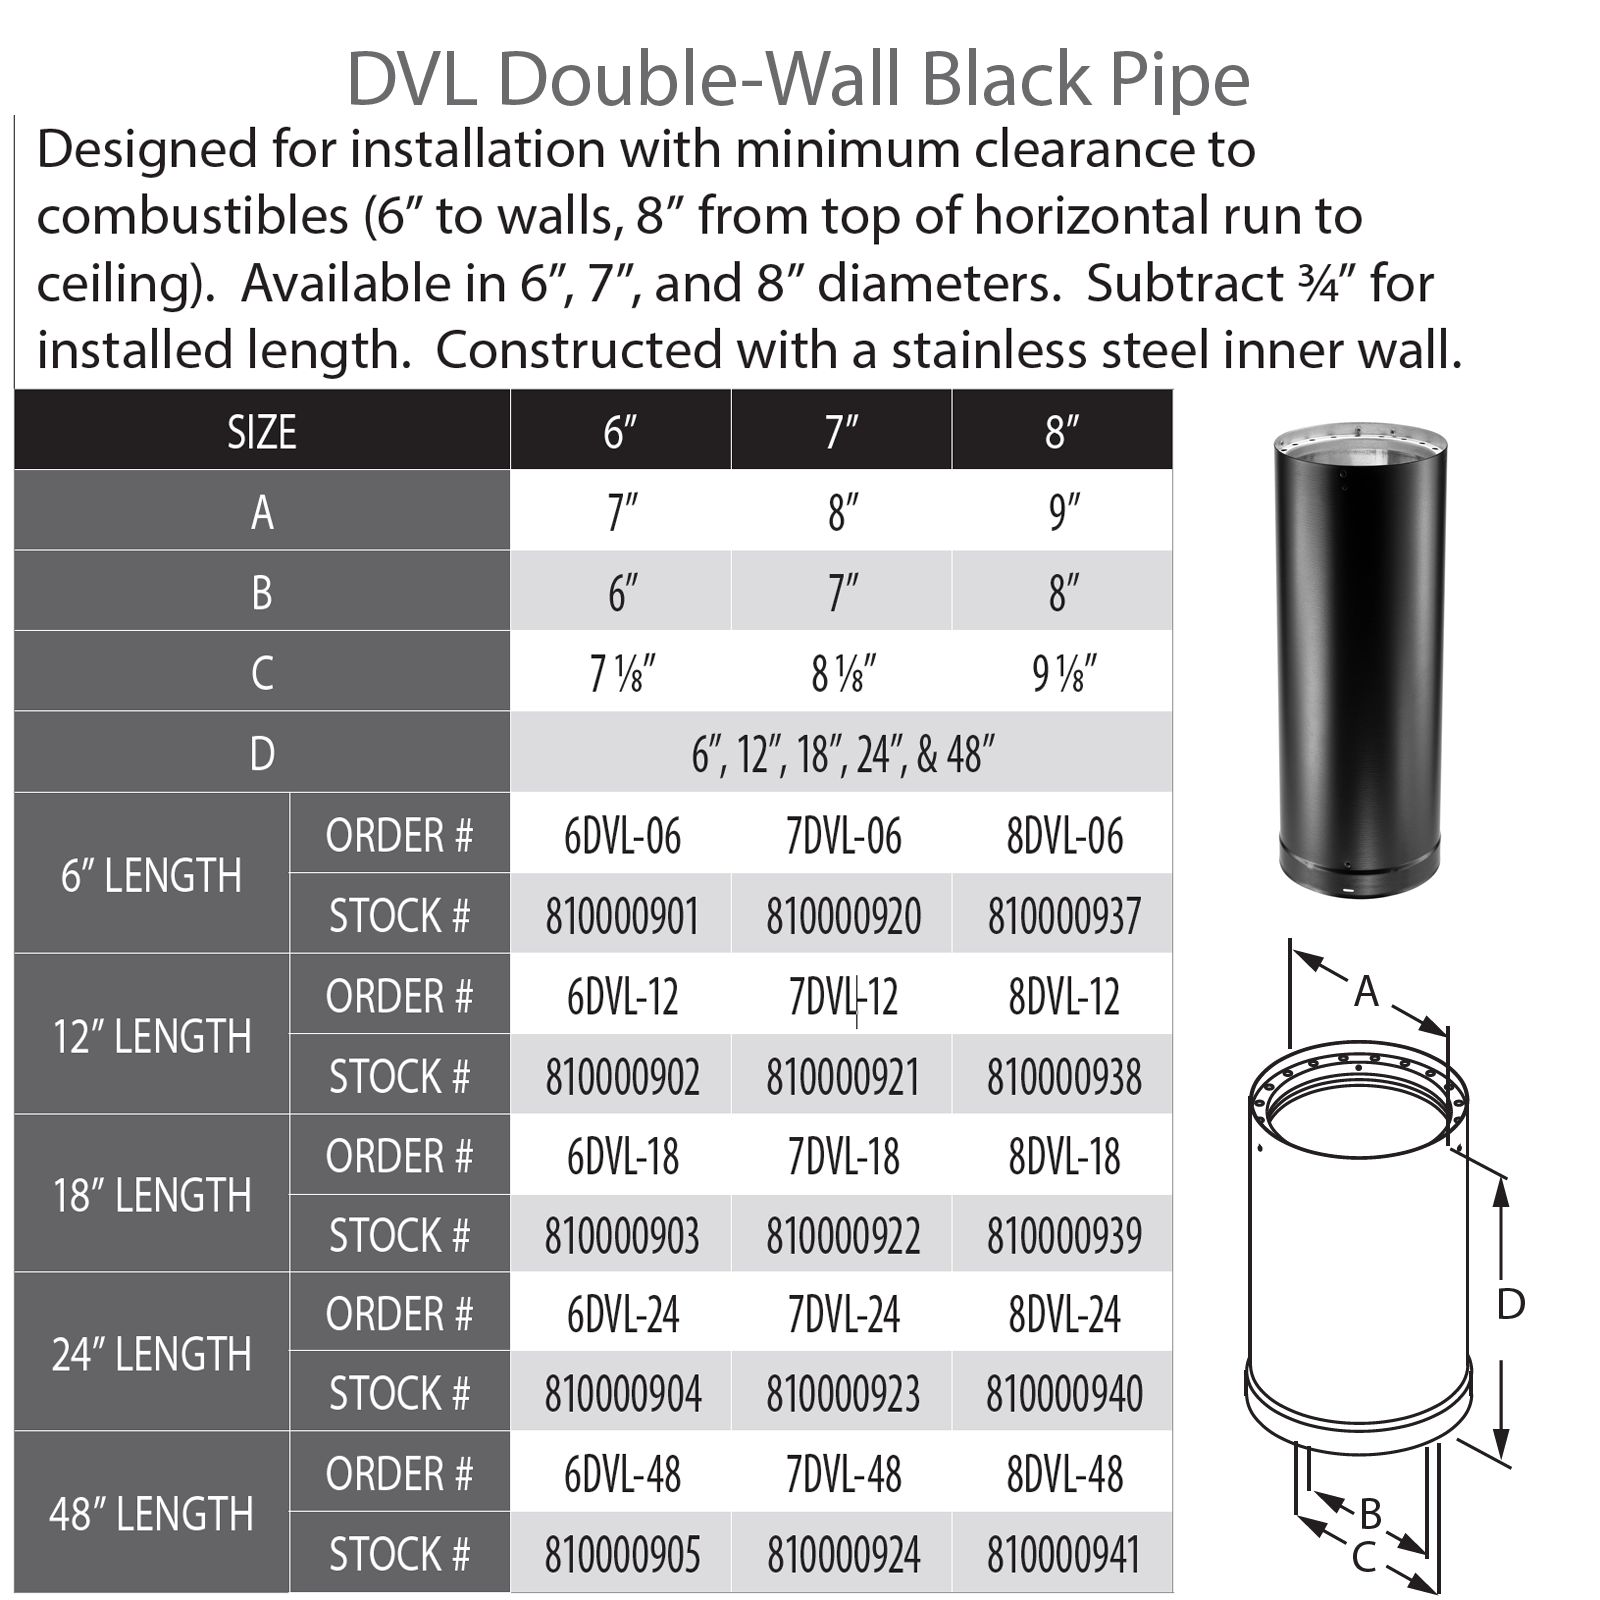 6 Diameter DuraVent DVL Double-Wall Stove Pipe Components